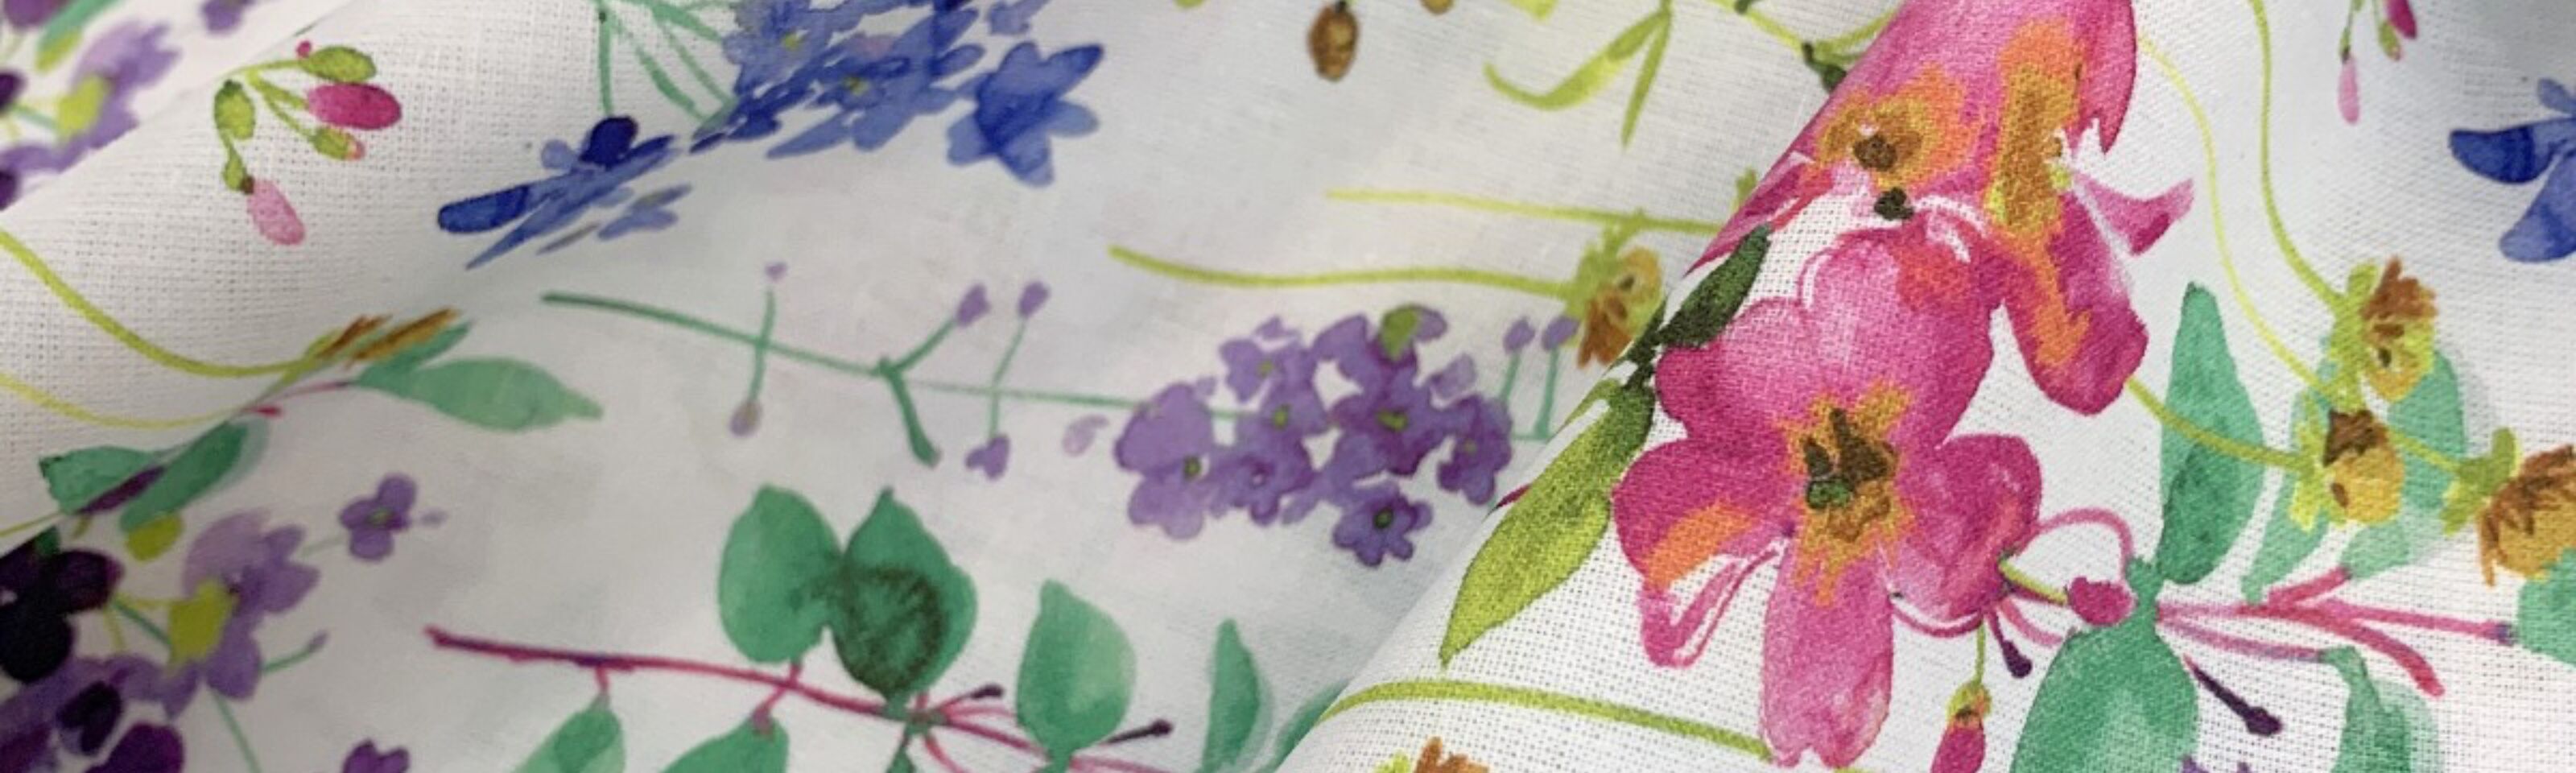 True Craft - Watercolour Wildflowers -John Louden Korean Crafting Fabric - Multicolour, Painted, Floral - Fold